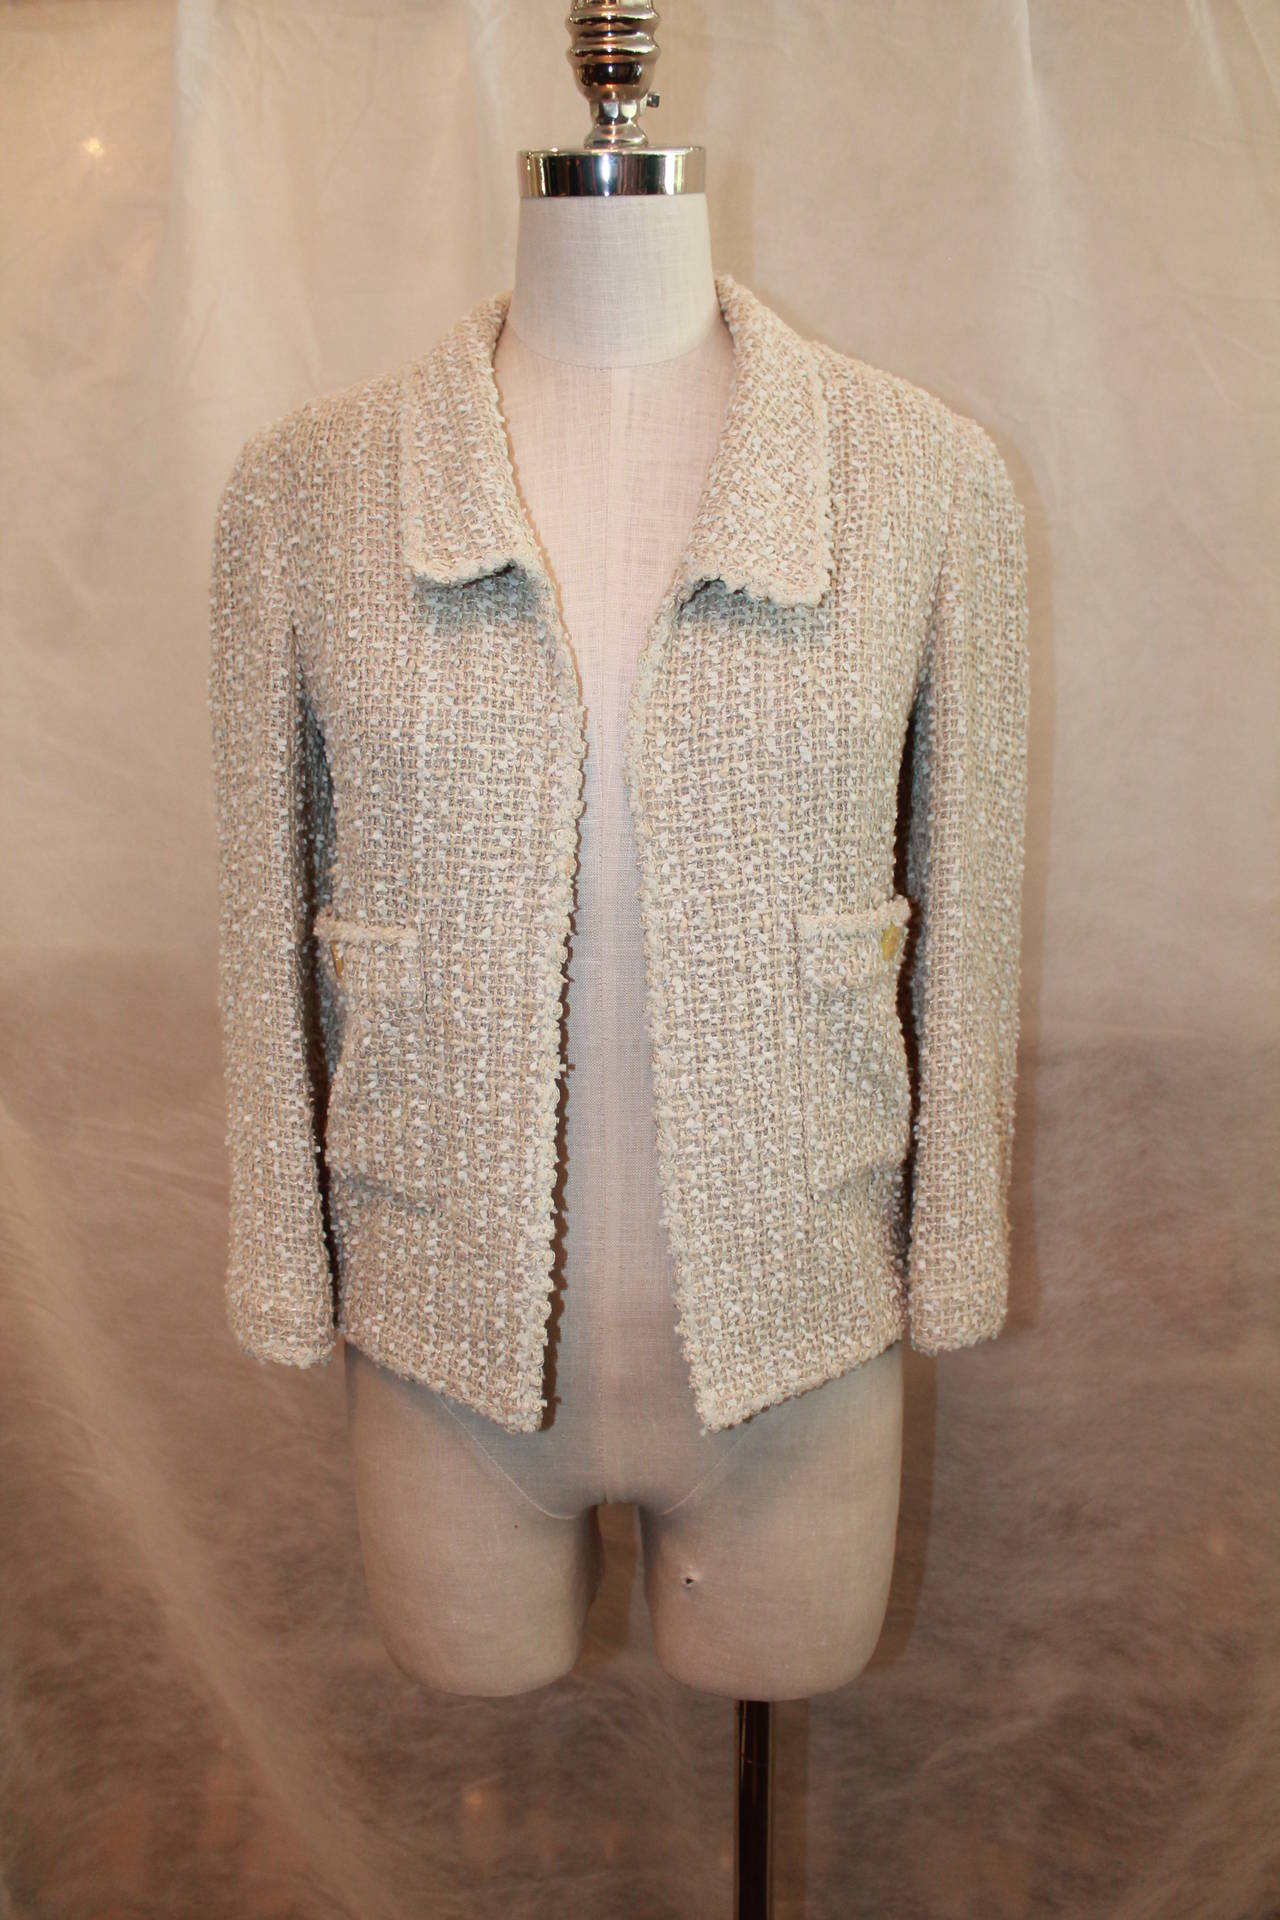 1999 Chanel Beige and White Tweed Jacket - Size 38

Fabric:
44% Cotton
27% Wool
14% Polyamide
3% Linen
12% Viscose 
Lining: Laine Wool